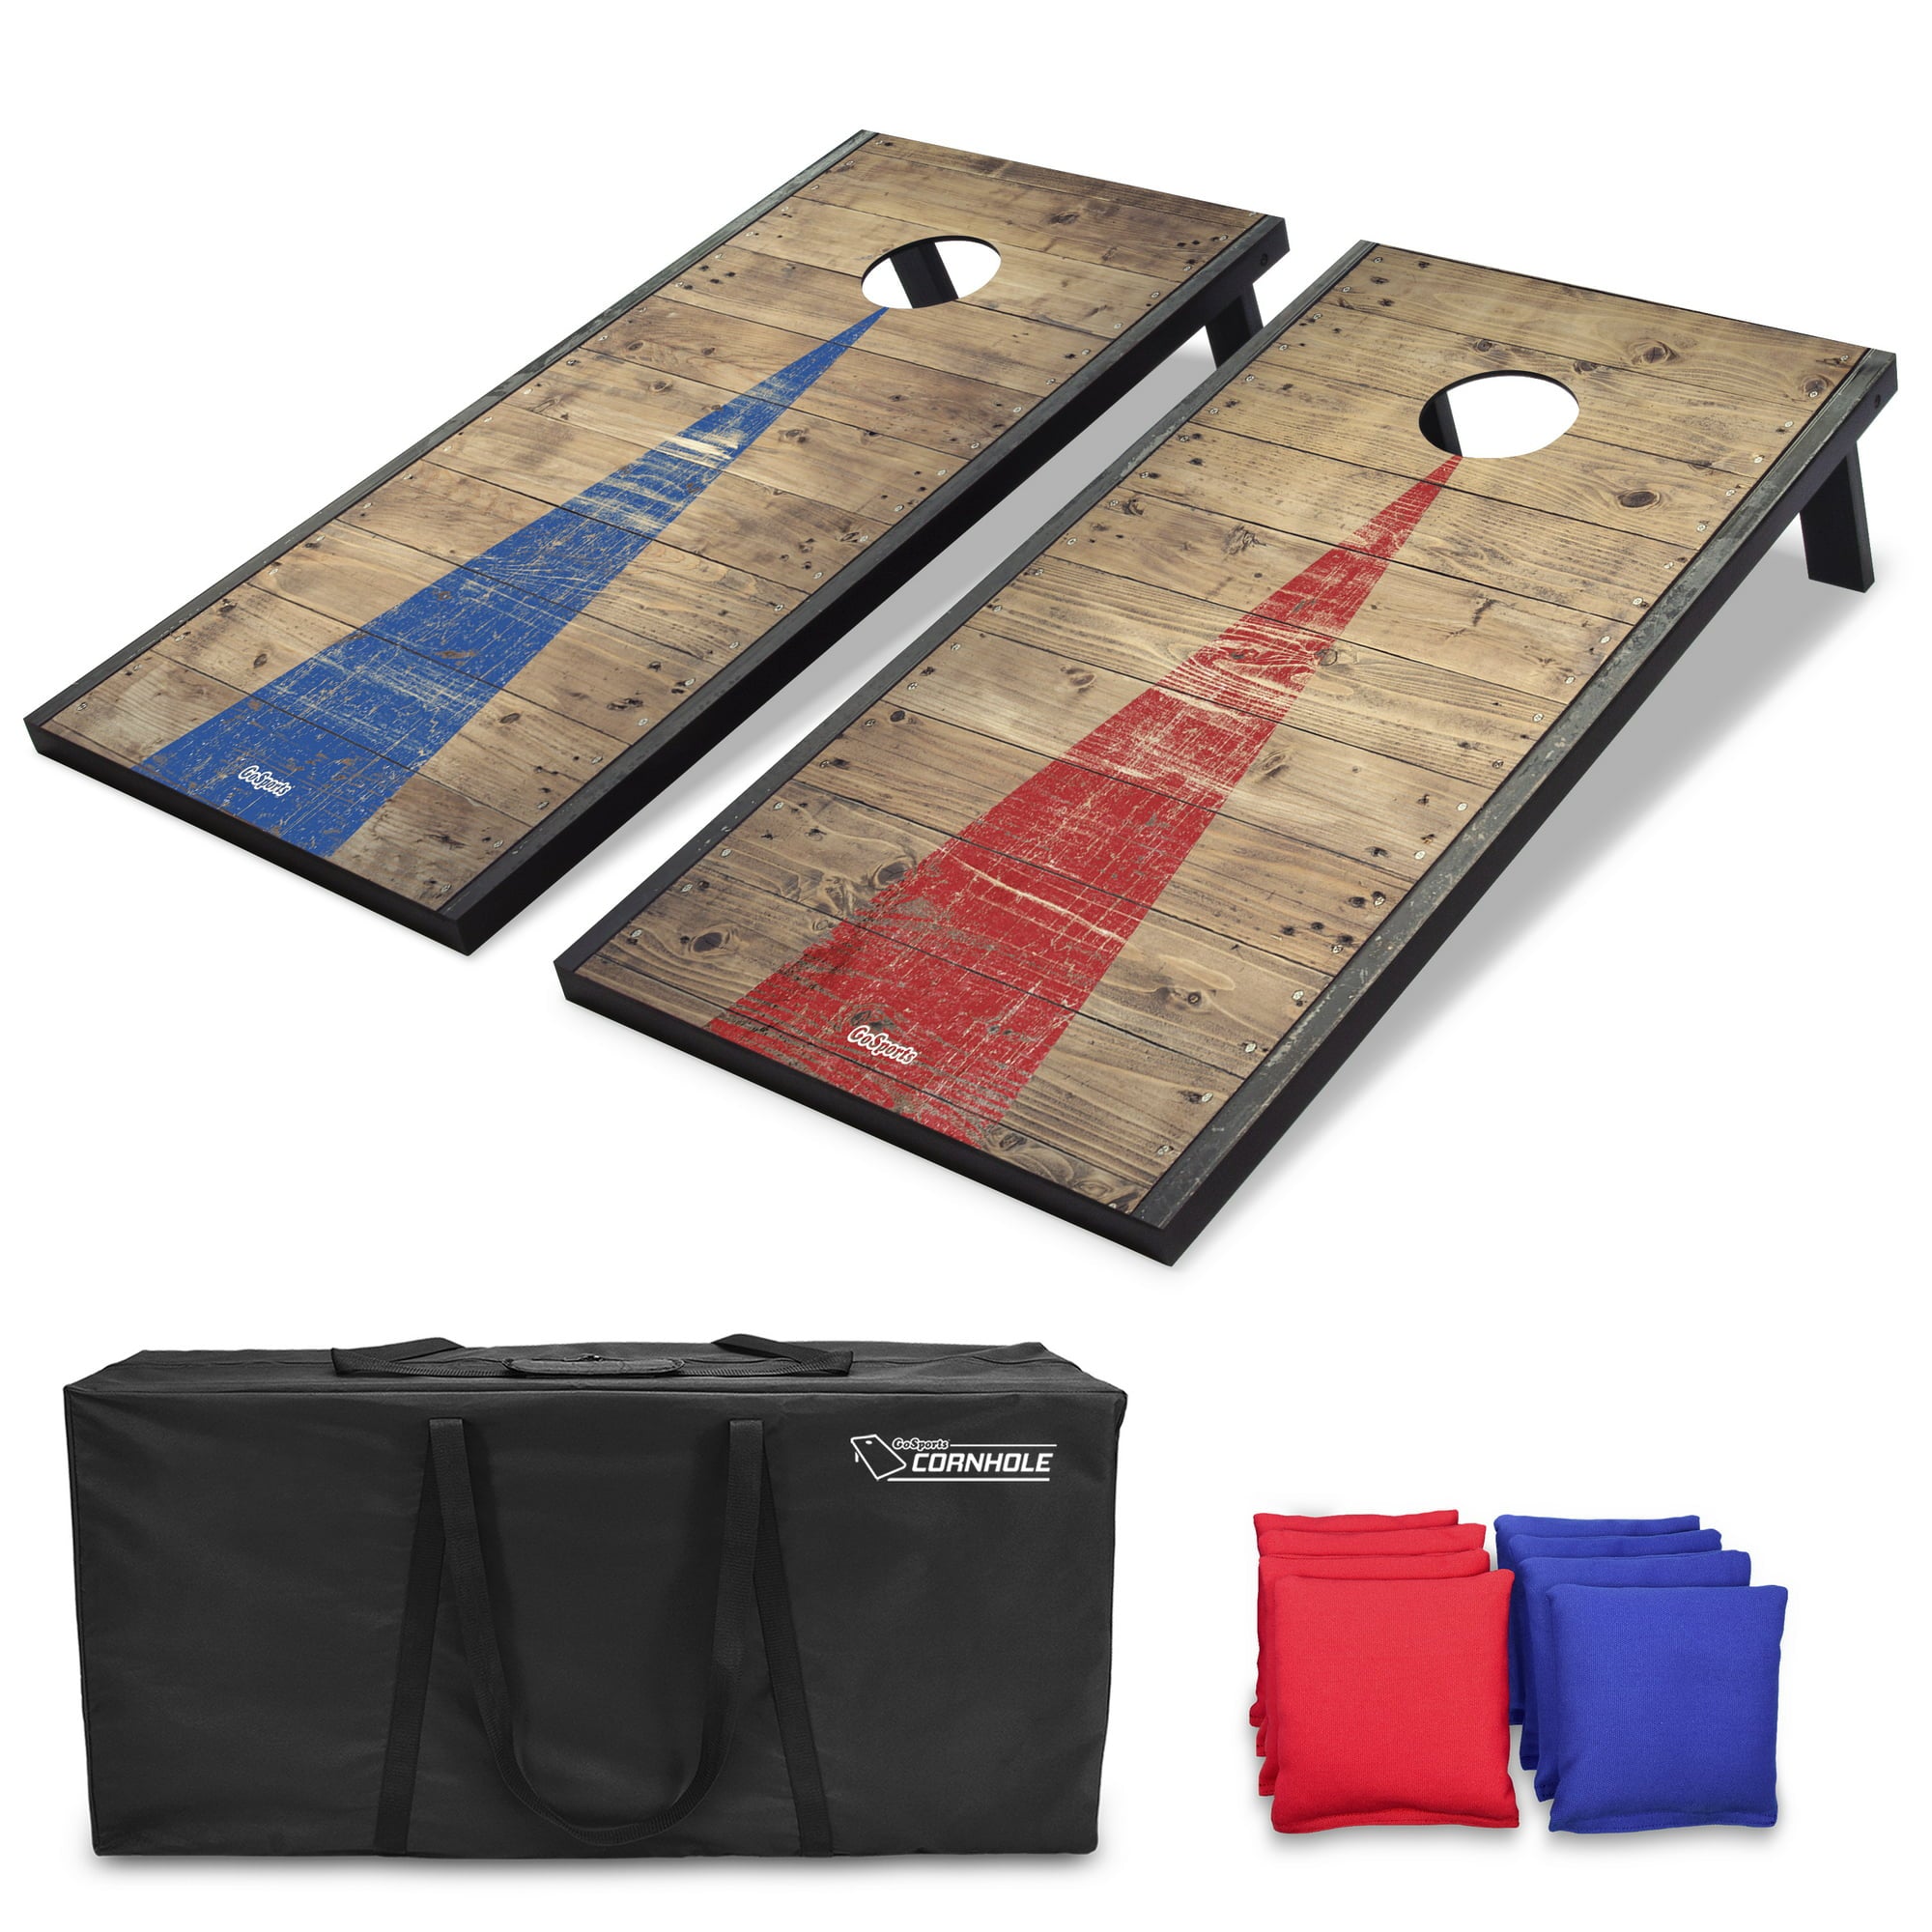 GoSports 4'x2' Classic Cornhole Set with Rustic Wood Decals | Includes 8 Bags, Carry Case and Rules